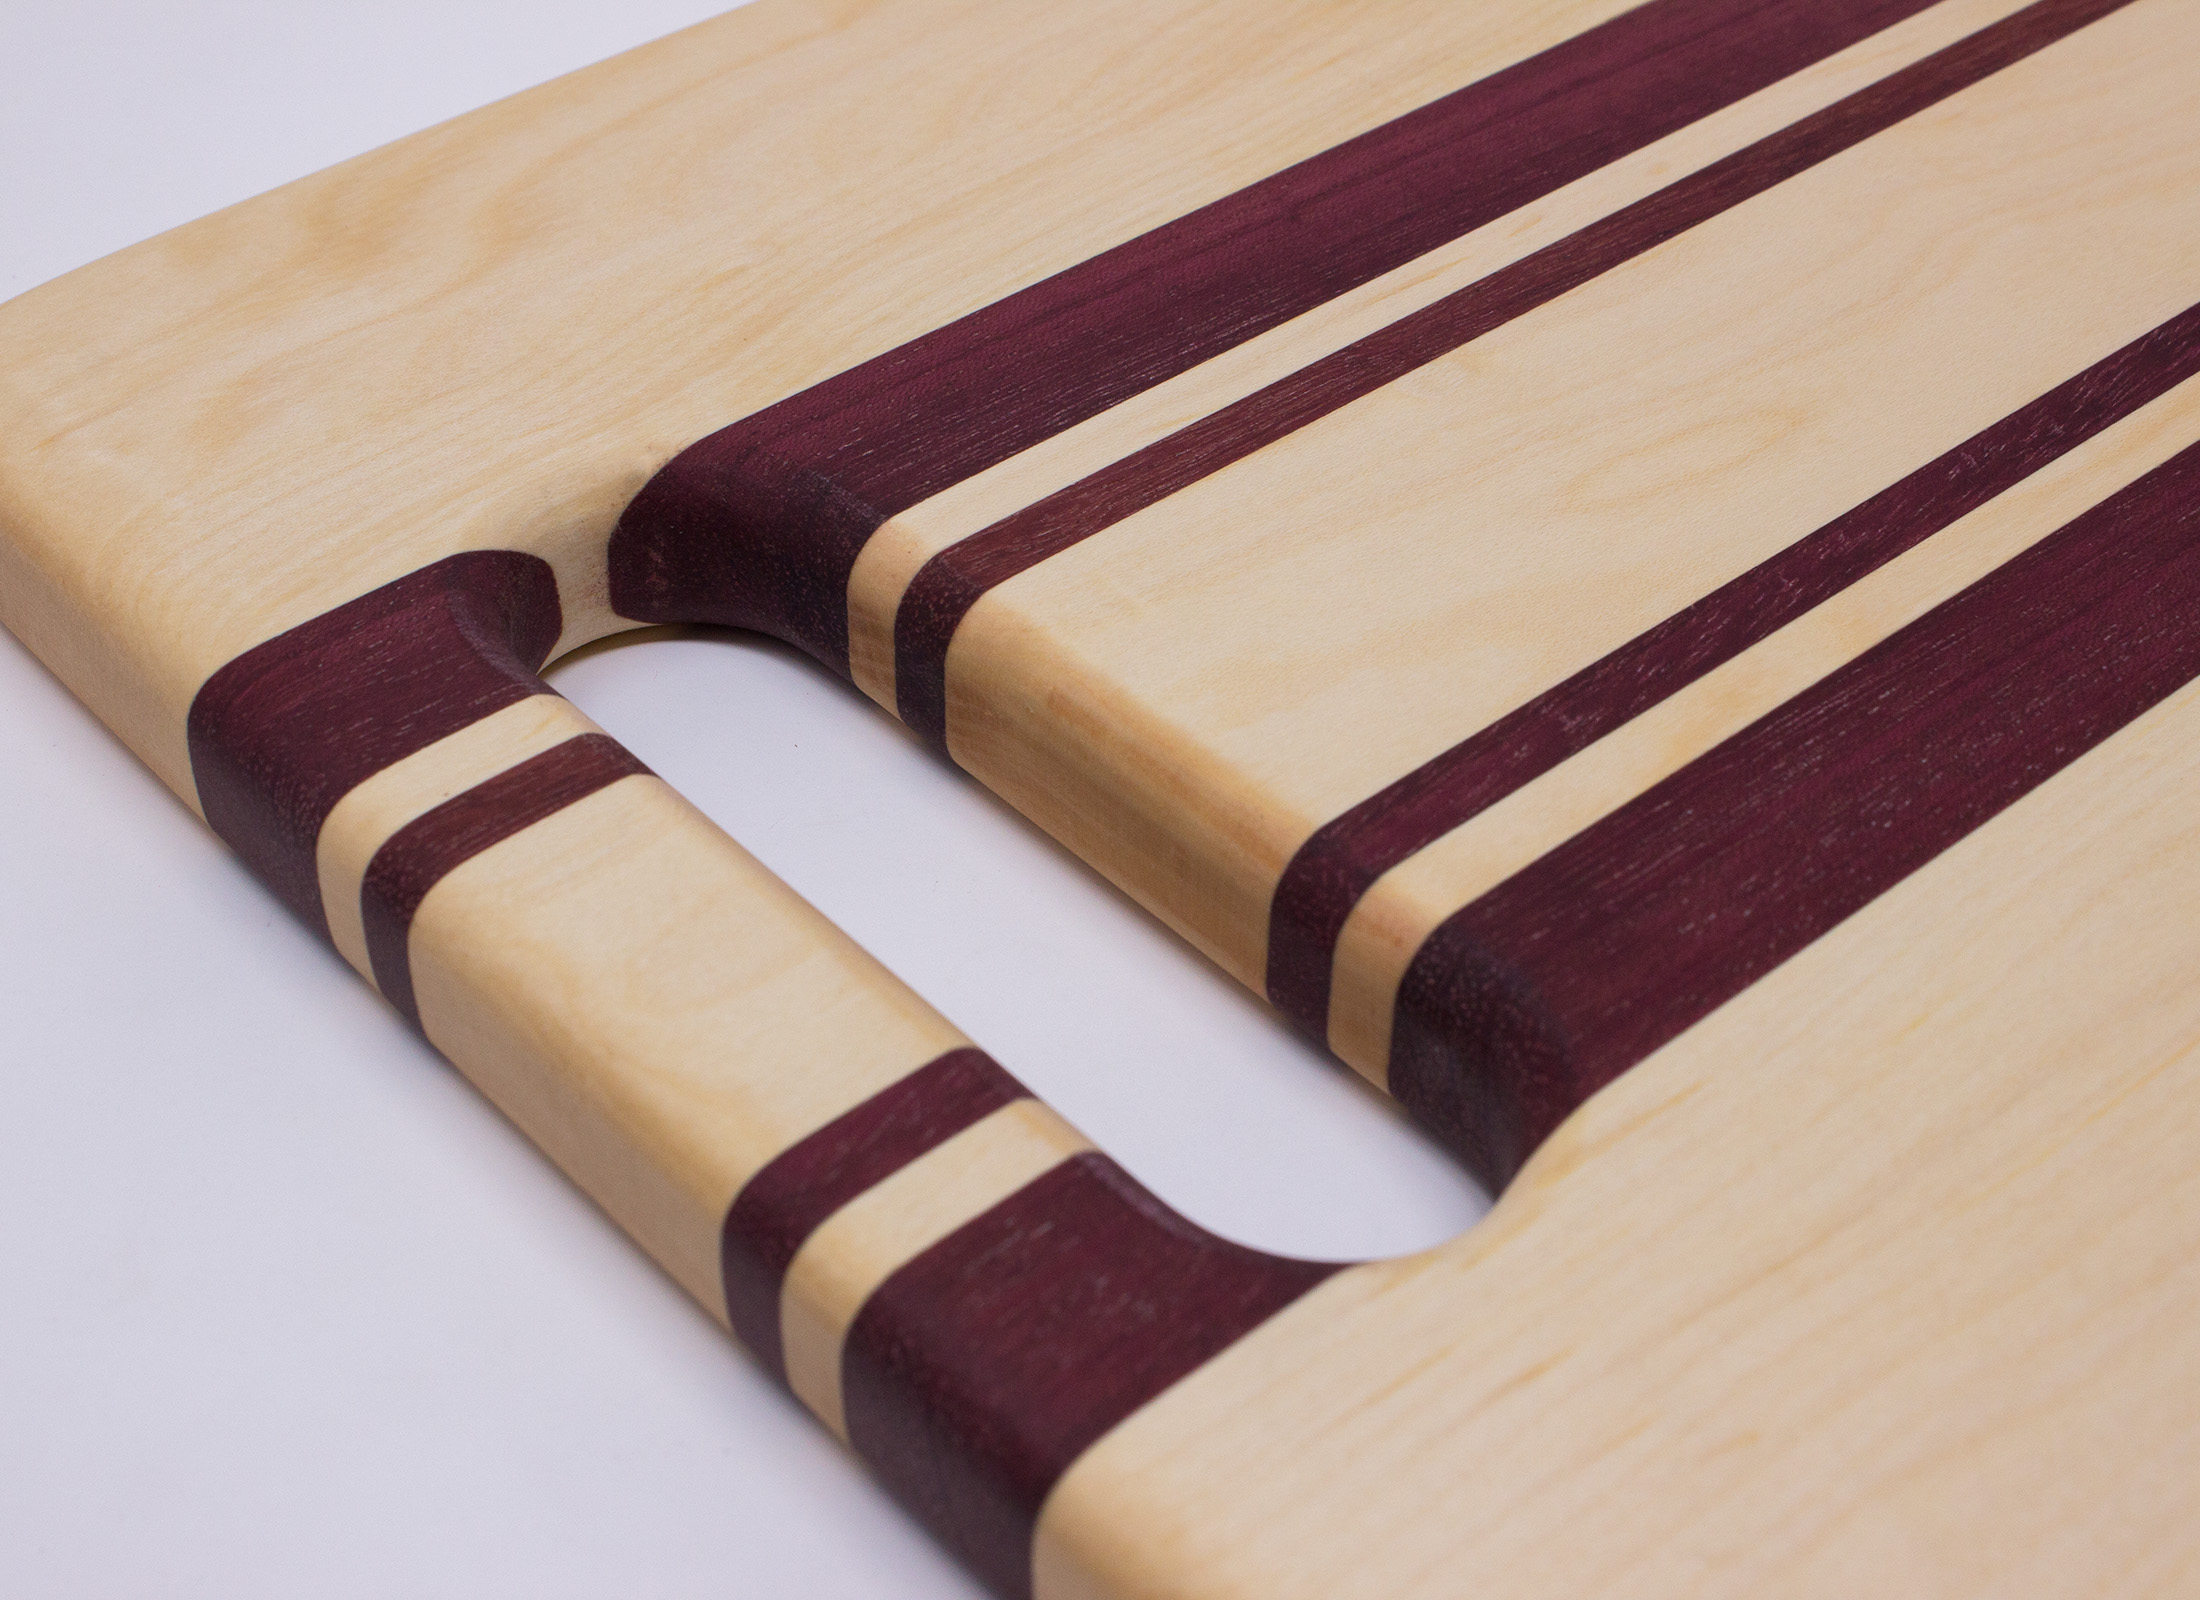 https://www.rockfordwoodcrafts.com/wp-content/uploads/Mapleand-Purpleheart-Cutting-Board-with-Handle-Handle-Close-Up.jpg